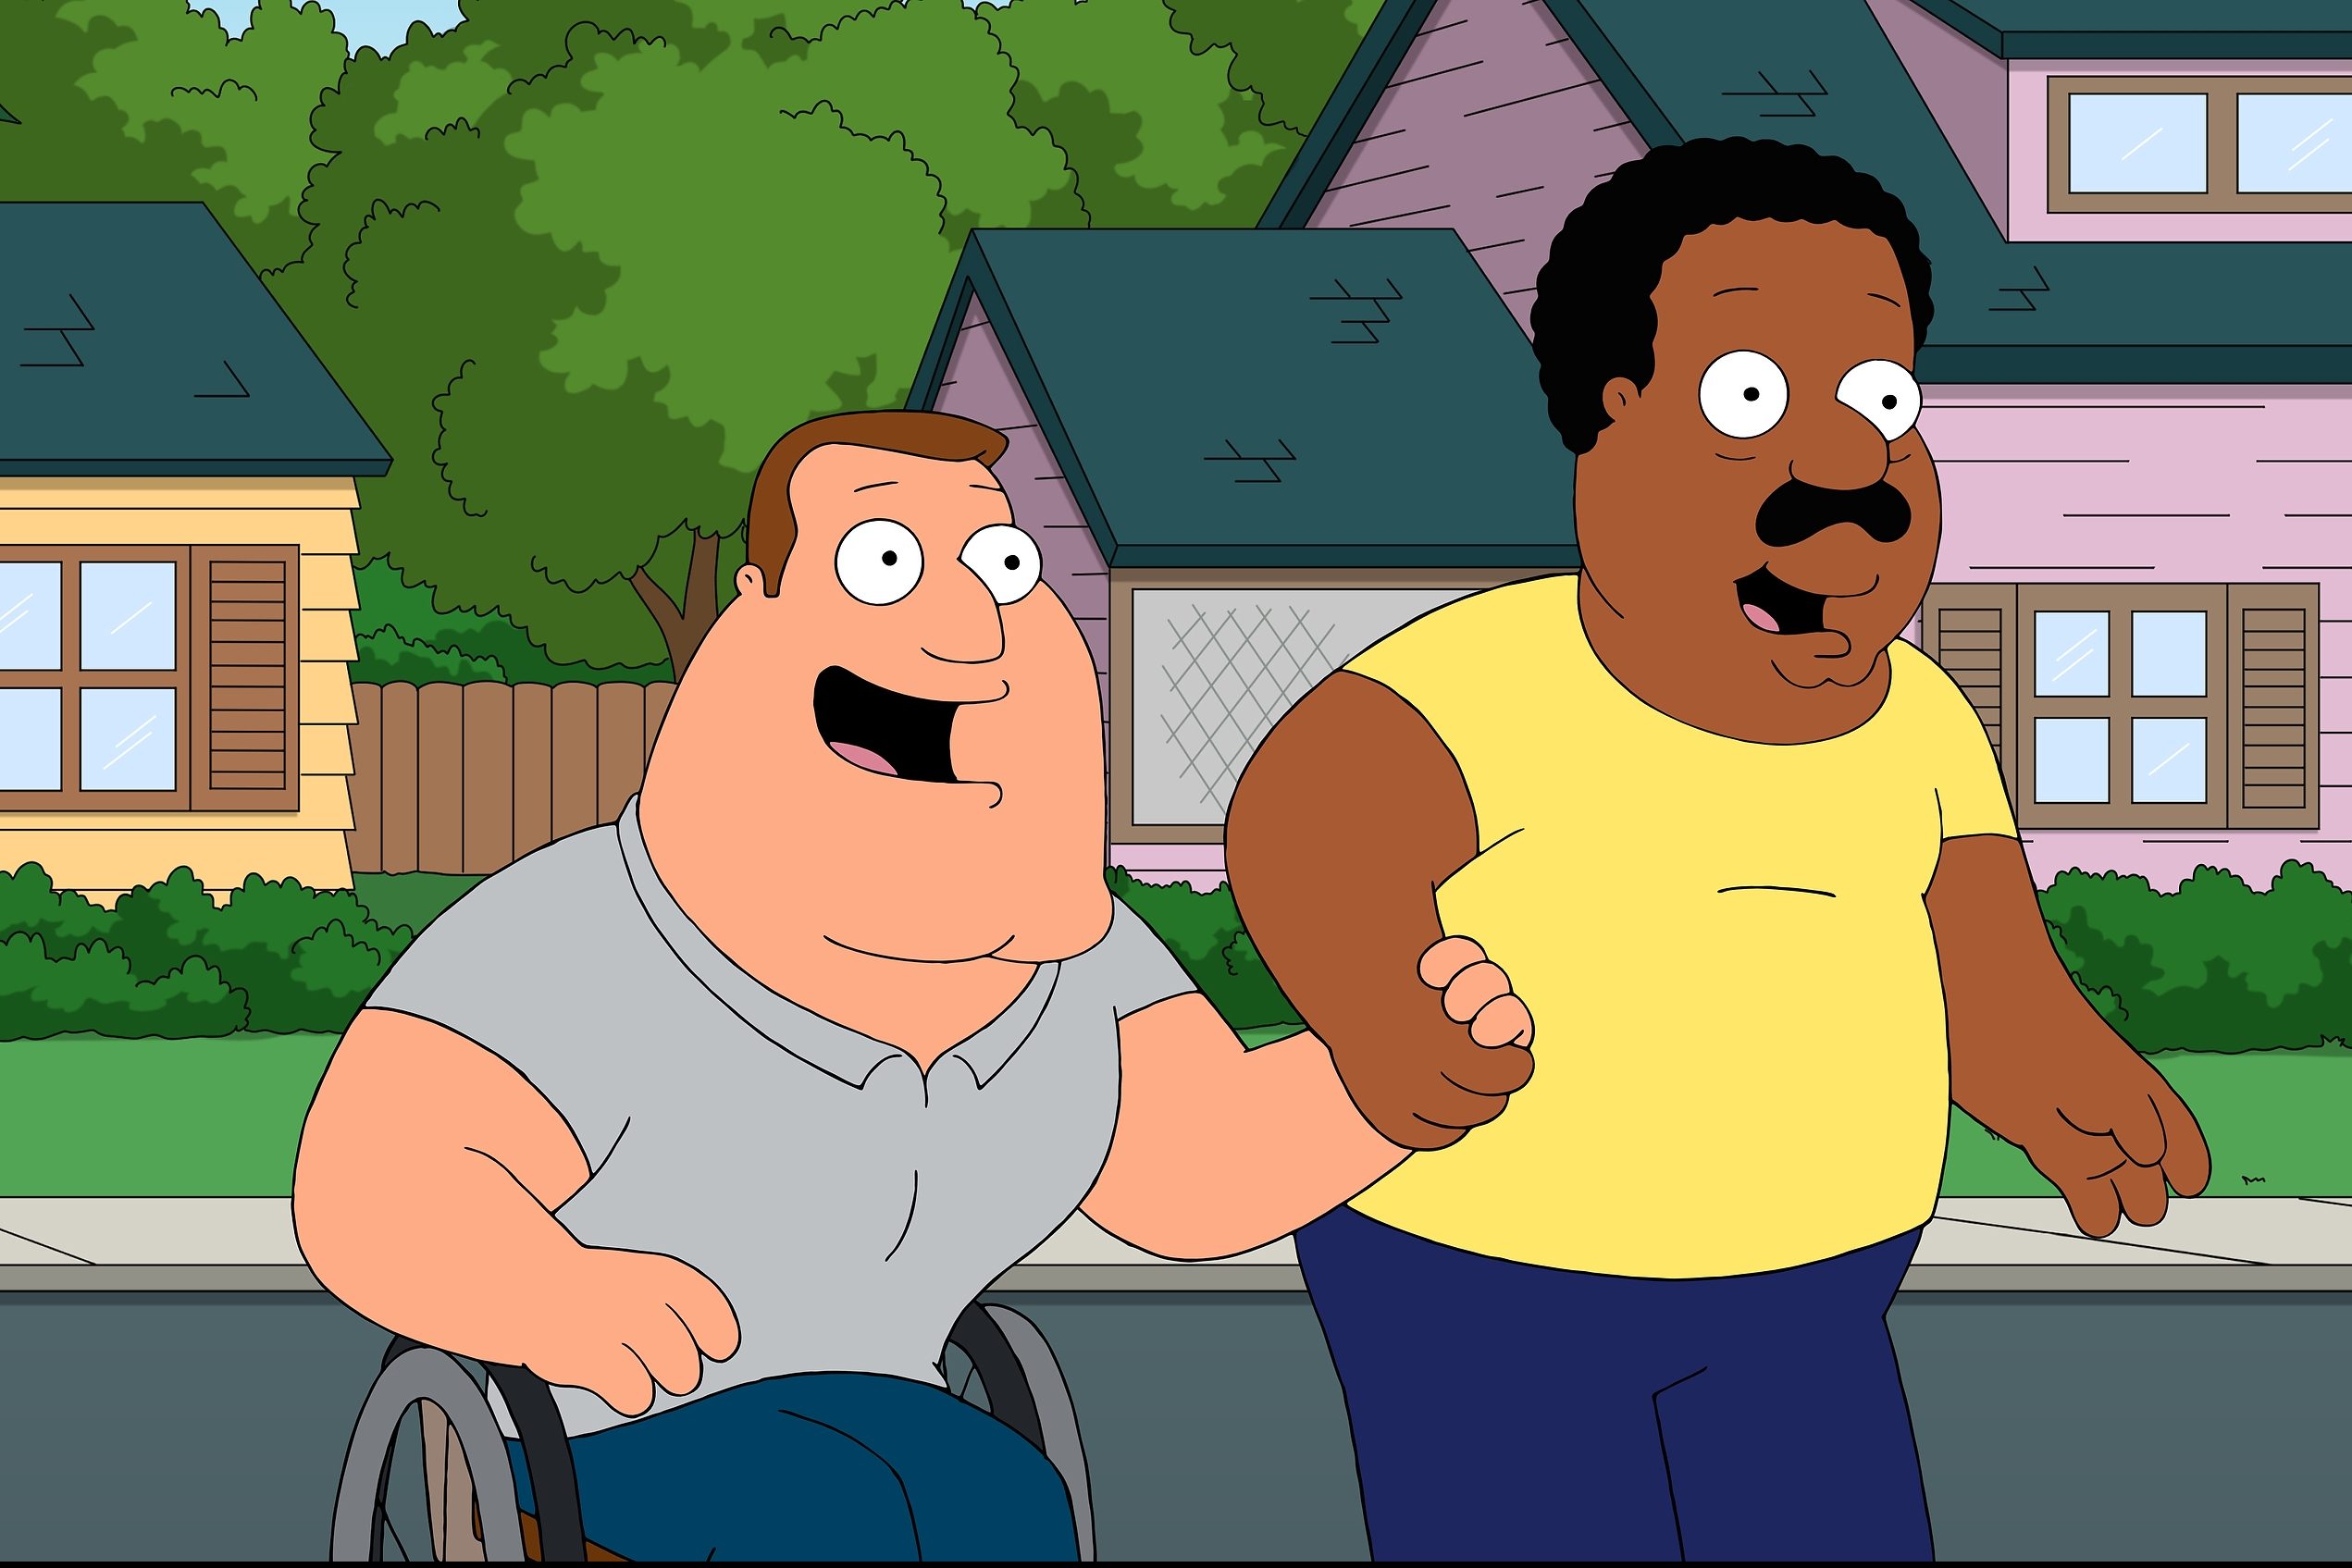 Mike Henry to stop voicing Cleveland Brown on 'Family Guy